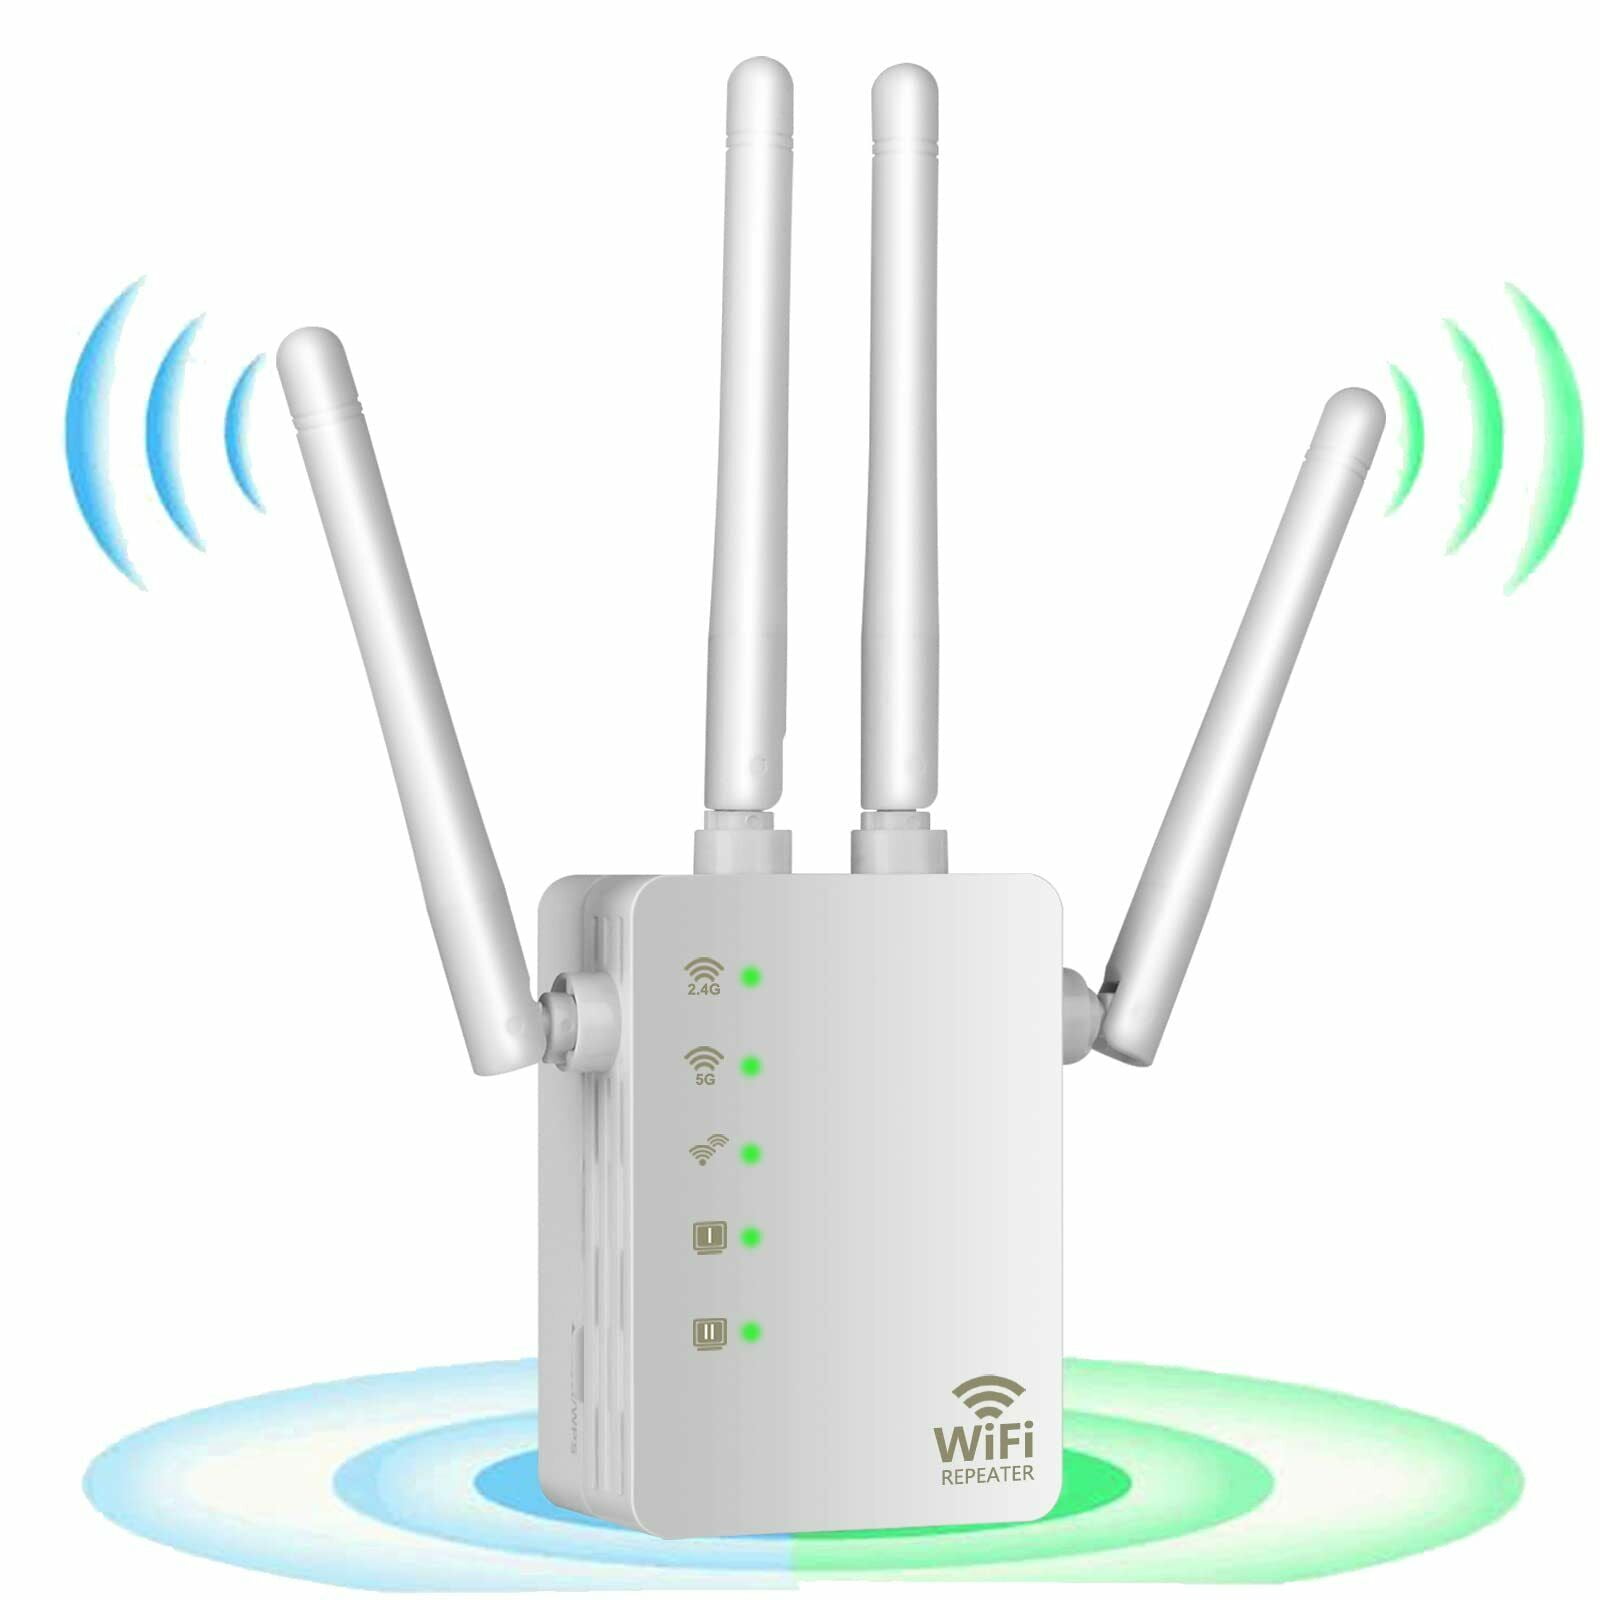 Unbranded WiFi Range Extender Signal Booster Dual Band WiFi Repeater with Ethernet Ports -